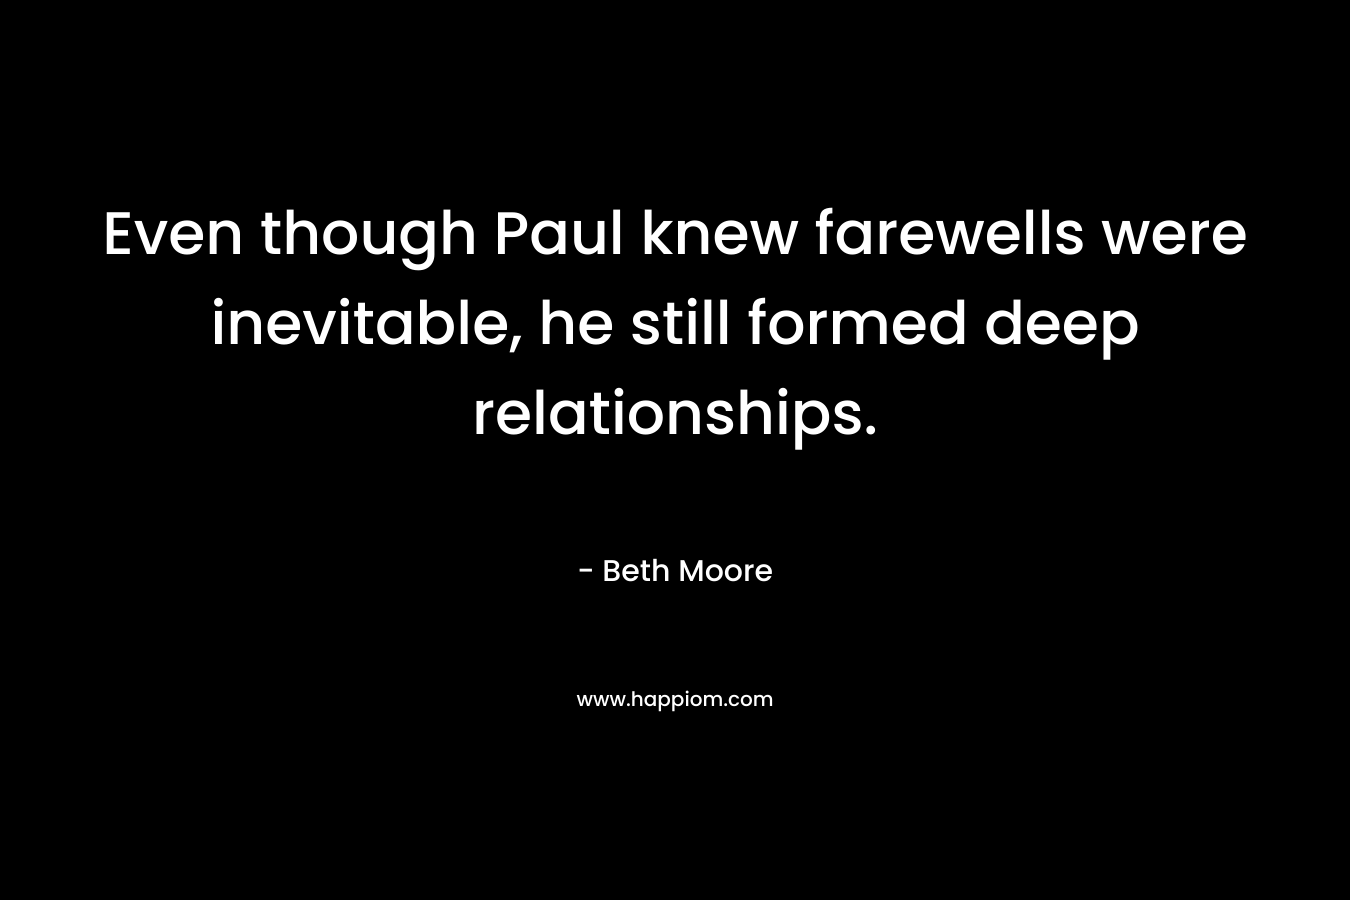 Even though Paul knew farewells were inevitable, he still formed deep relationships. – Beth Moore